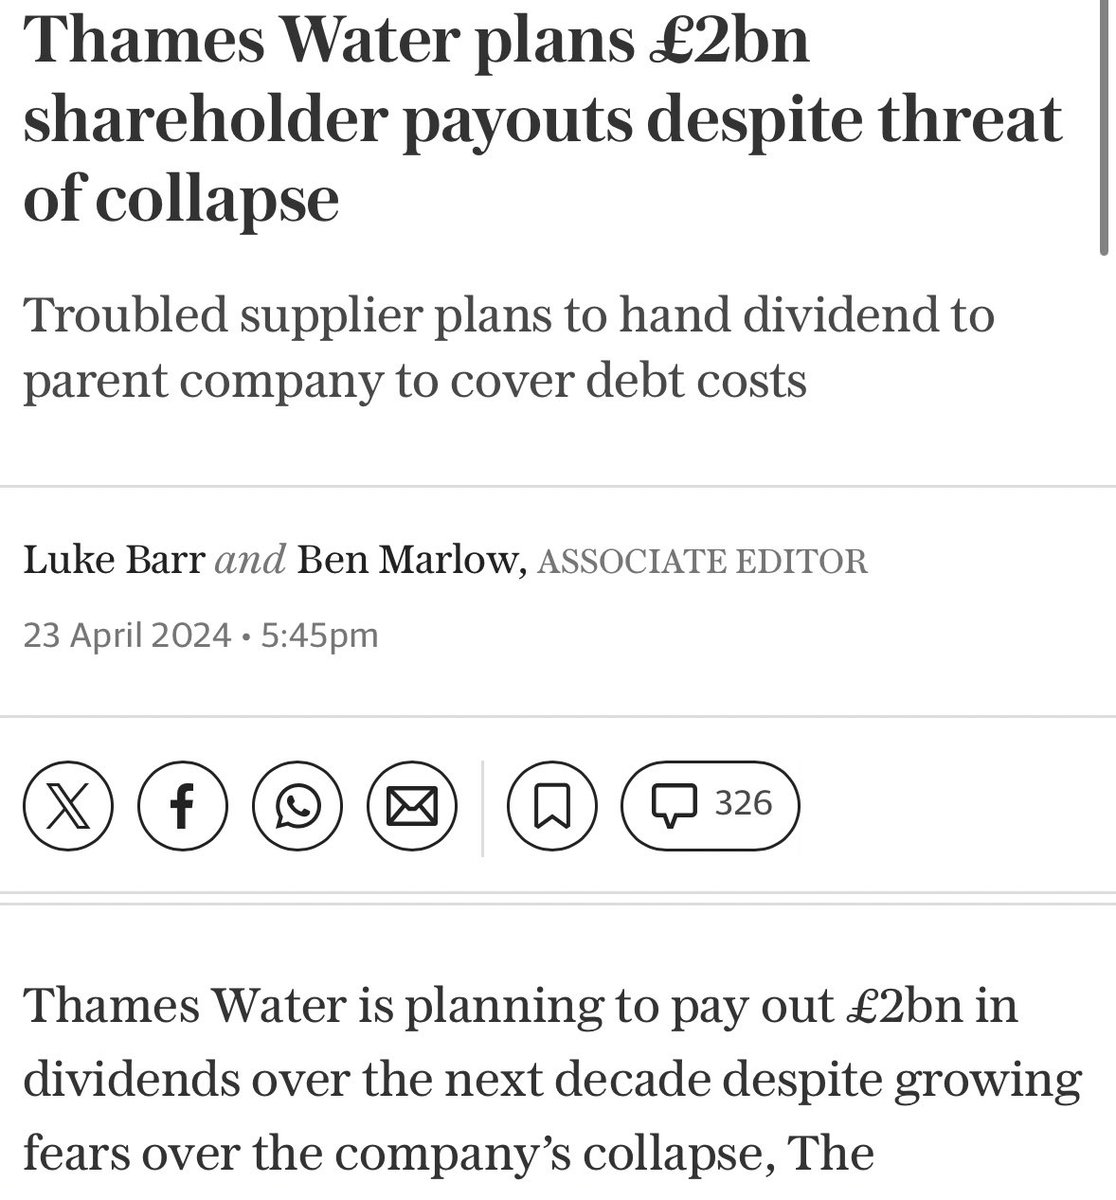 in any normal, functioning society those who’ve bled water companies dry for profit whilst racking up billions in debt and overseeing the collapse of service and network would be held criminally liable.